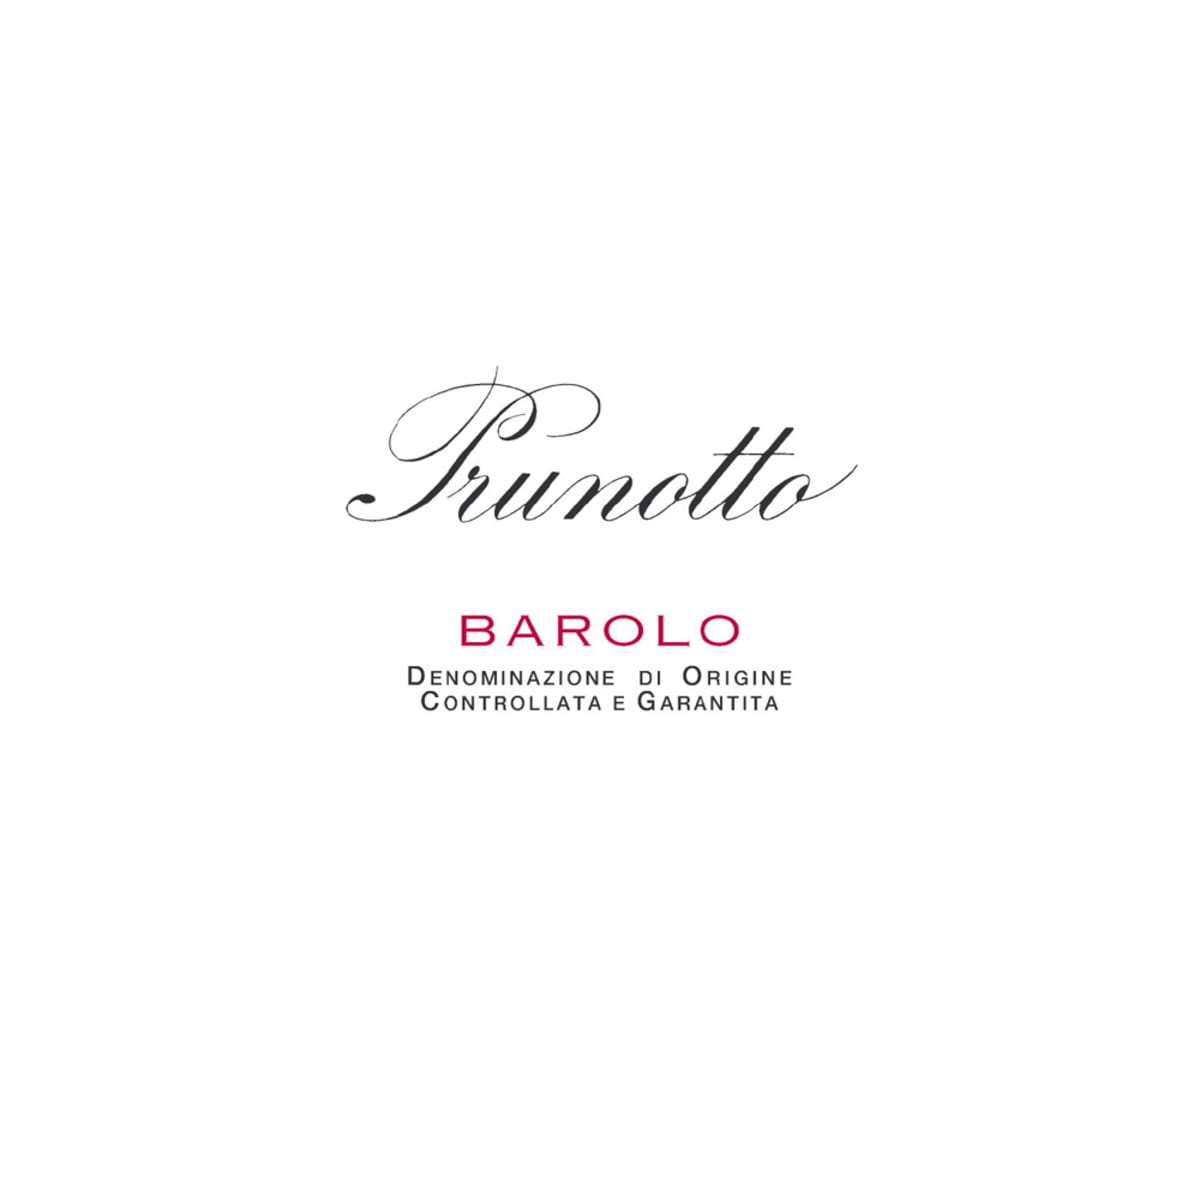 Prunotto Barolo 2008 Front Label